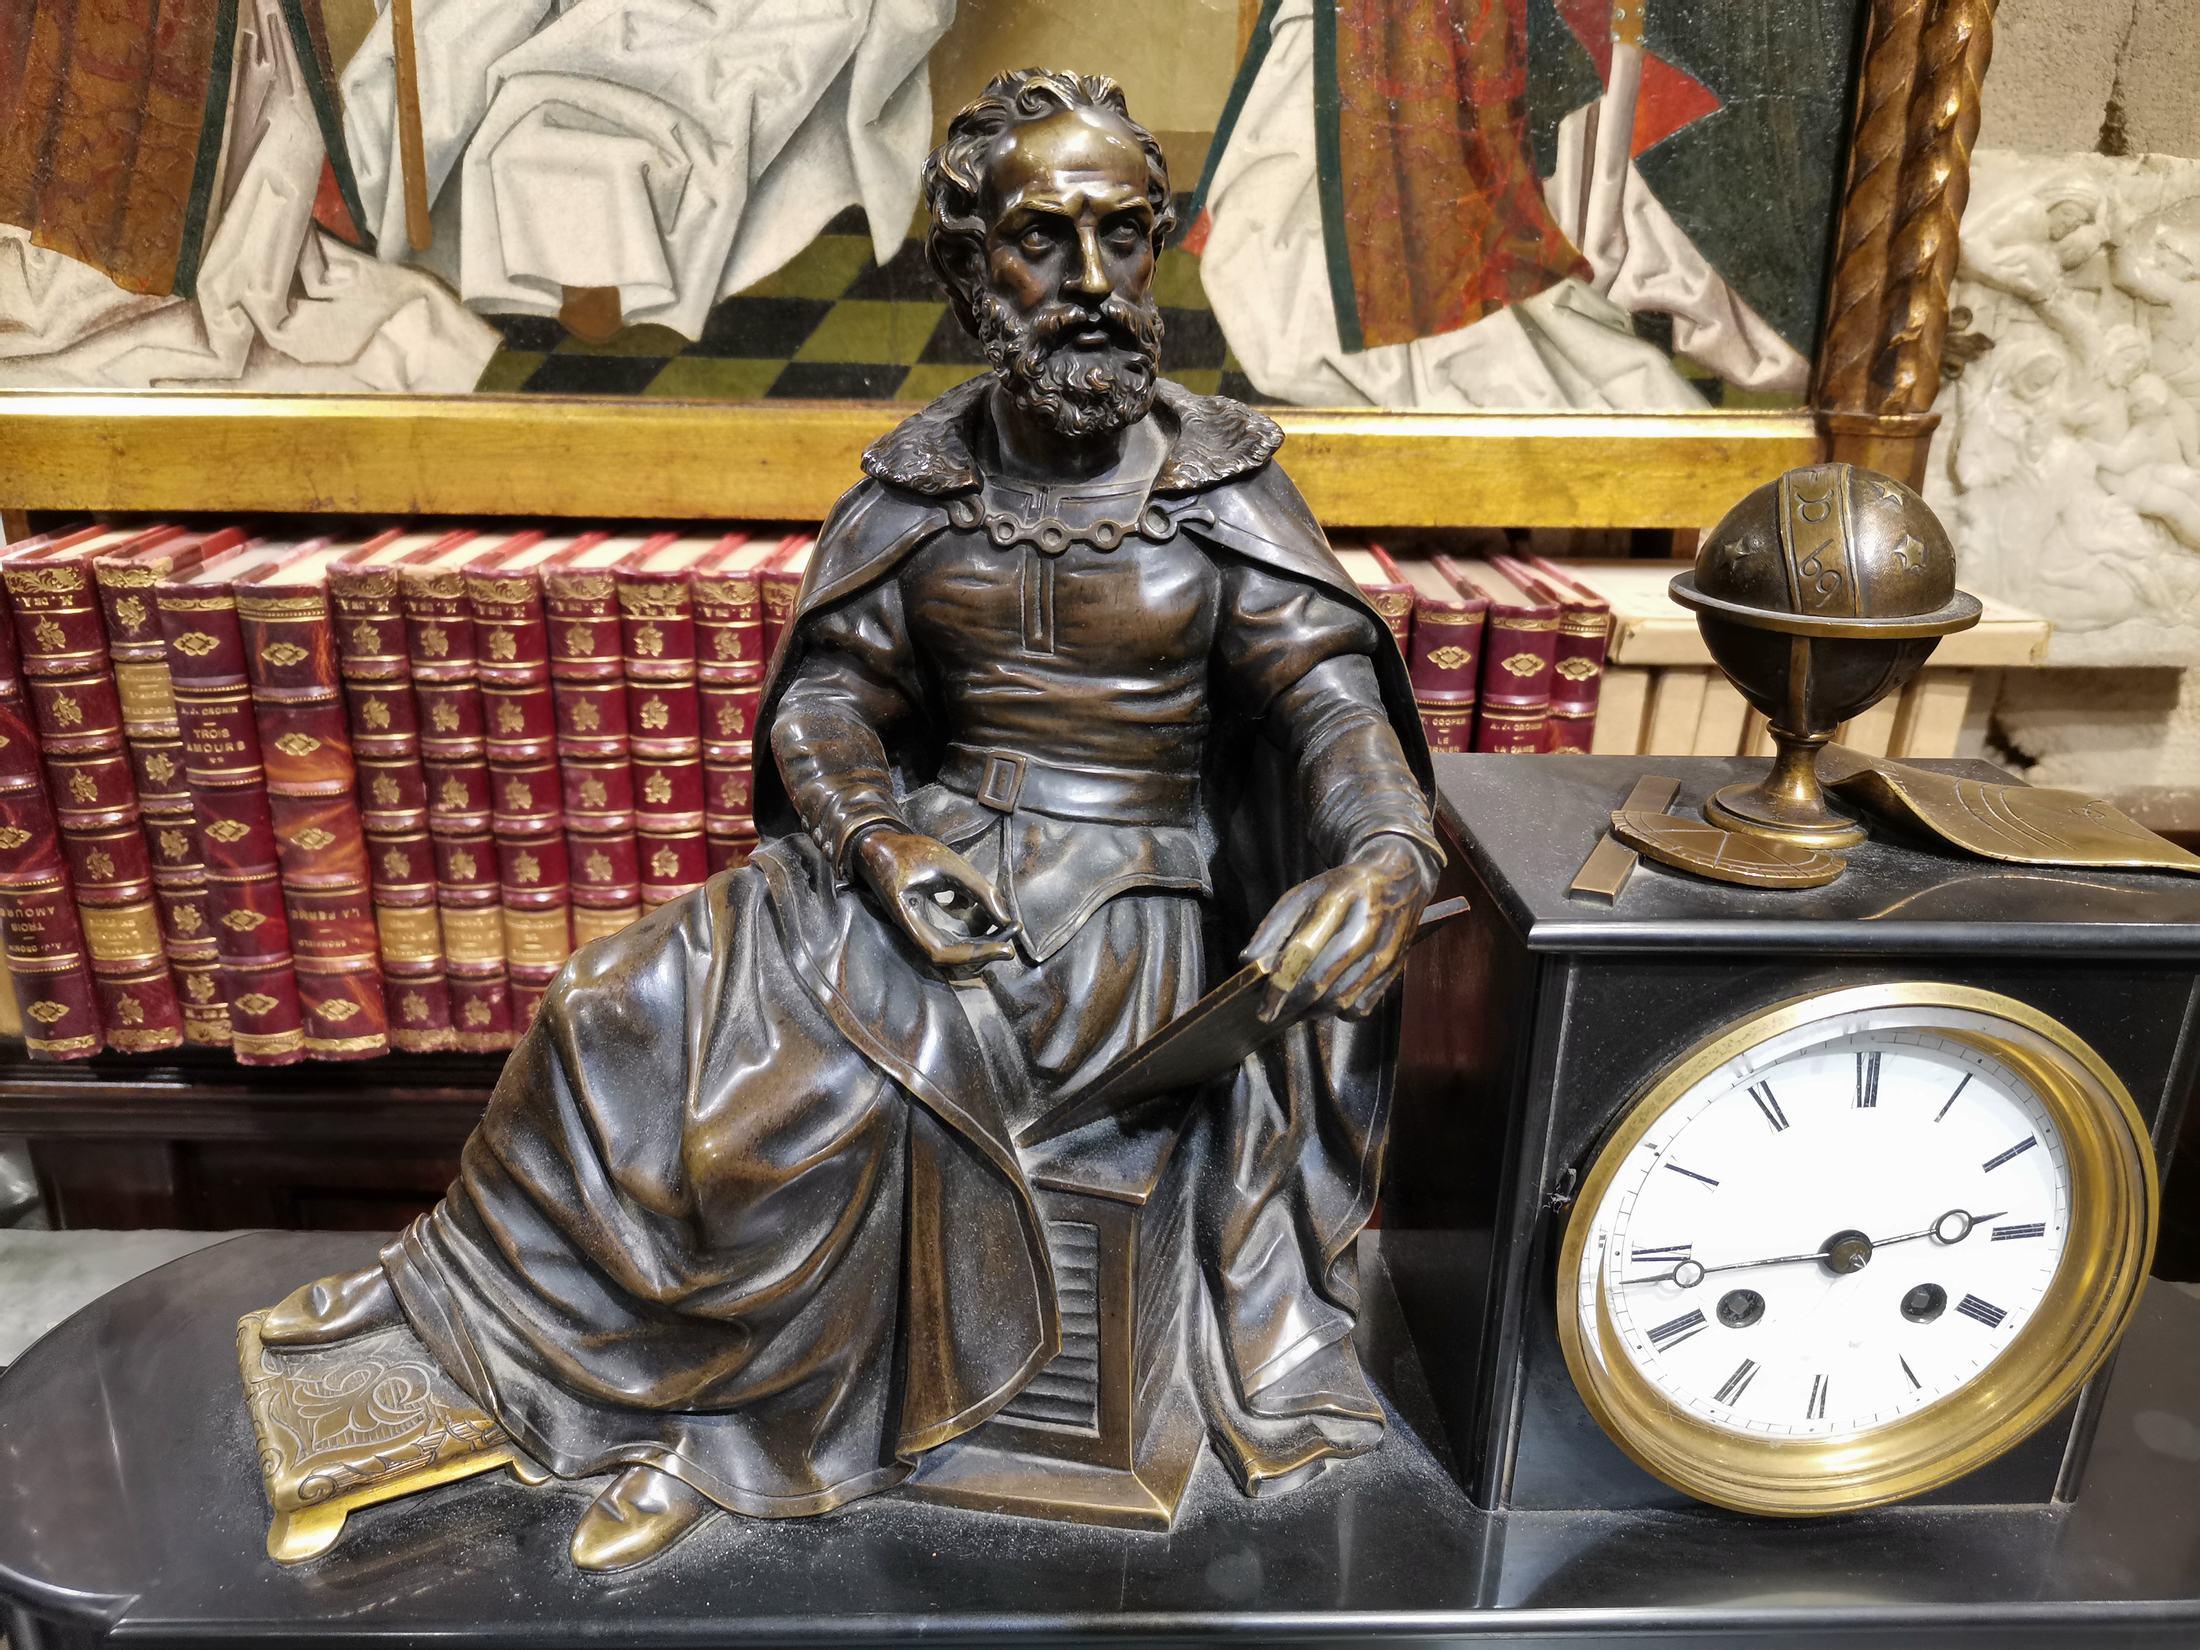 Marble and bronze clock with allegory of astronomy representing Copernico
The clock measurements: 60 x 48 x 16 cm and
Vases: 28 x 15 x 15 cm
End 19th century
Very good condition.